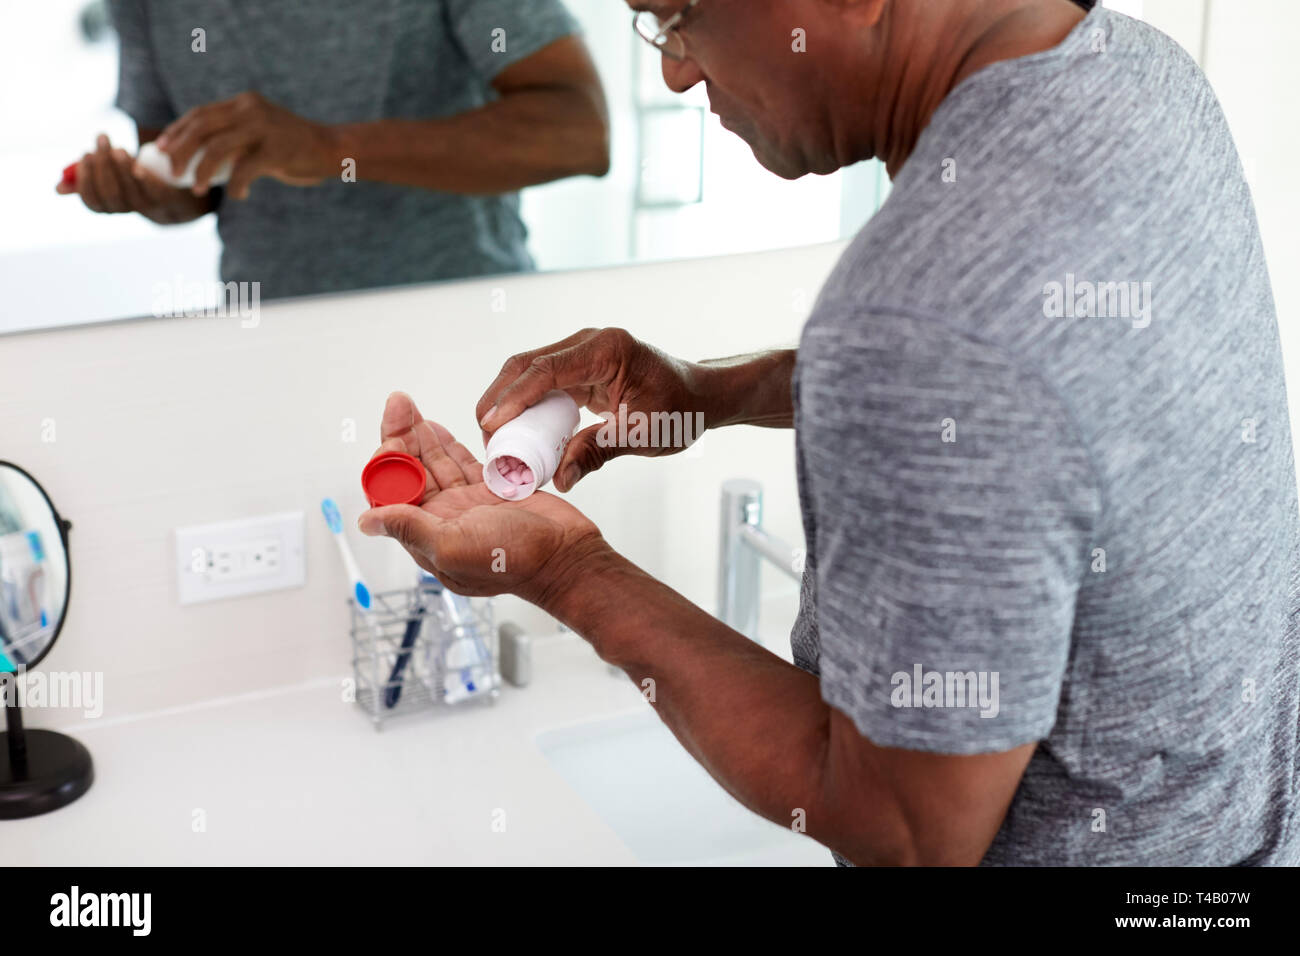 Close Up Of Senior Man In Bathroom Mirror Wearing Pajamas Holding Vitamin Supplement Tablets Stock Photo